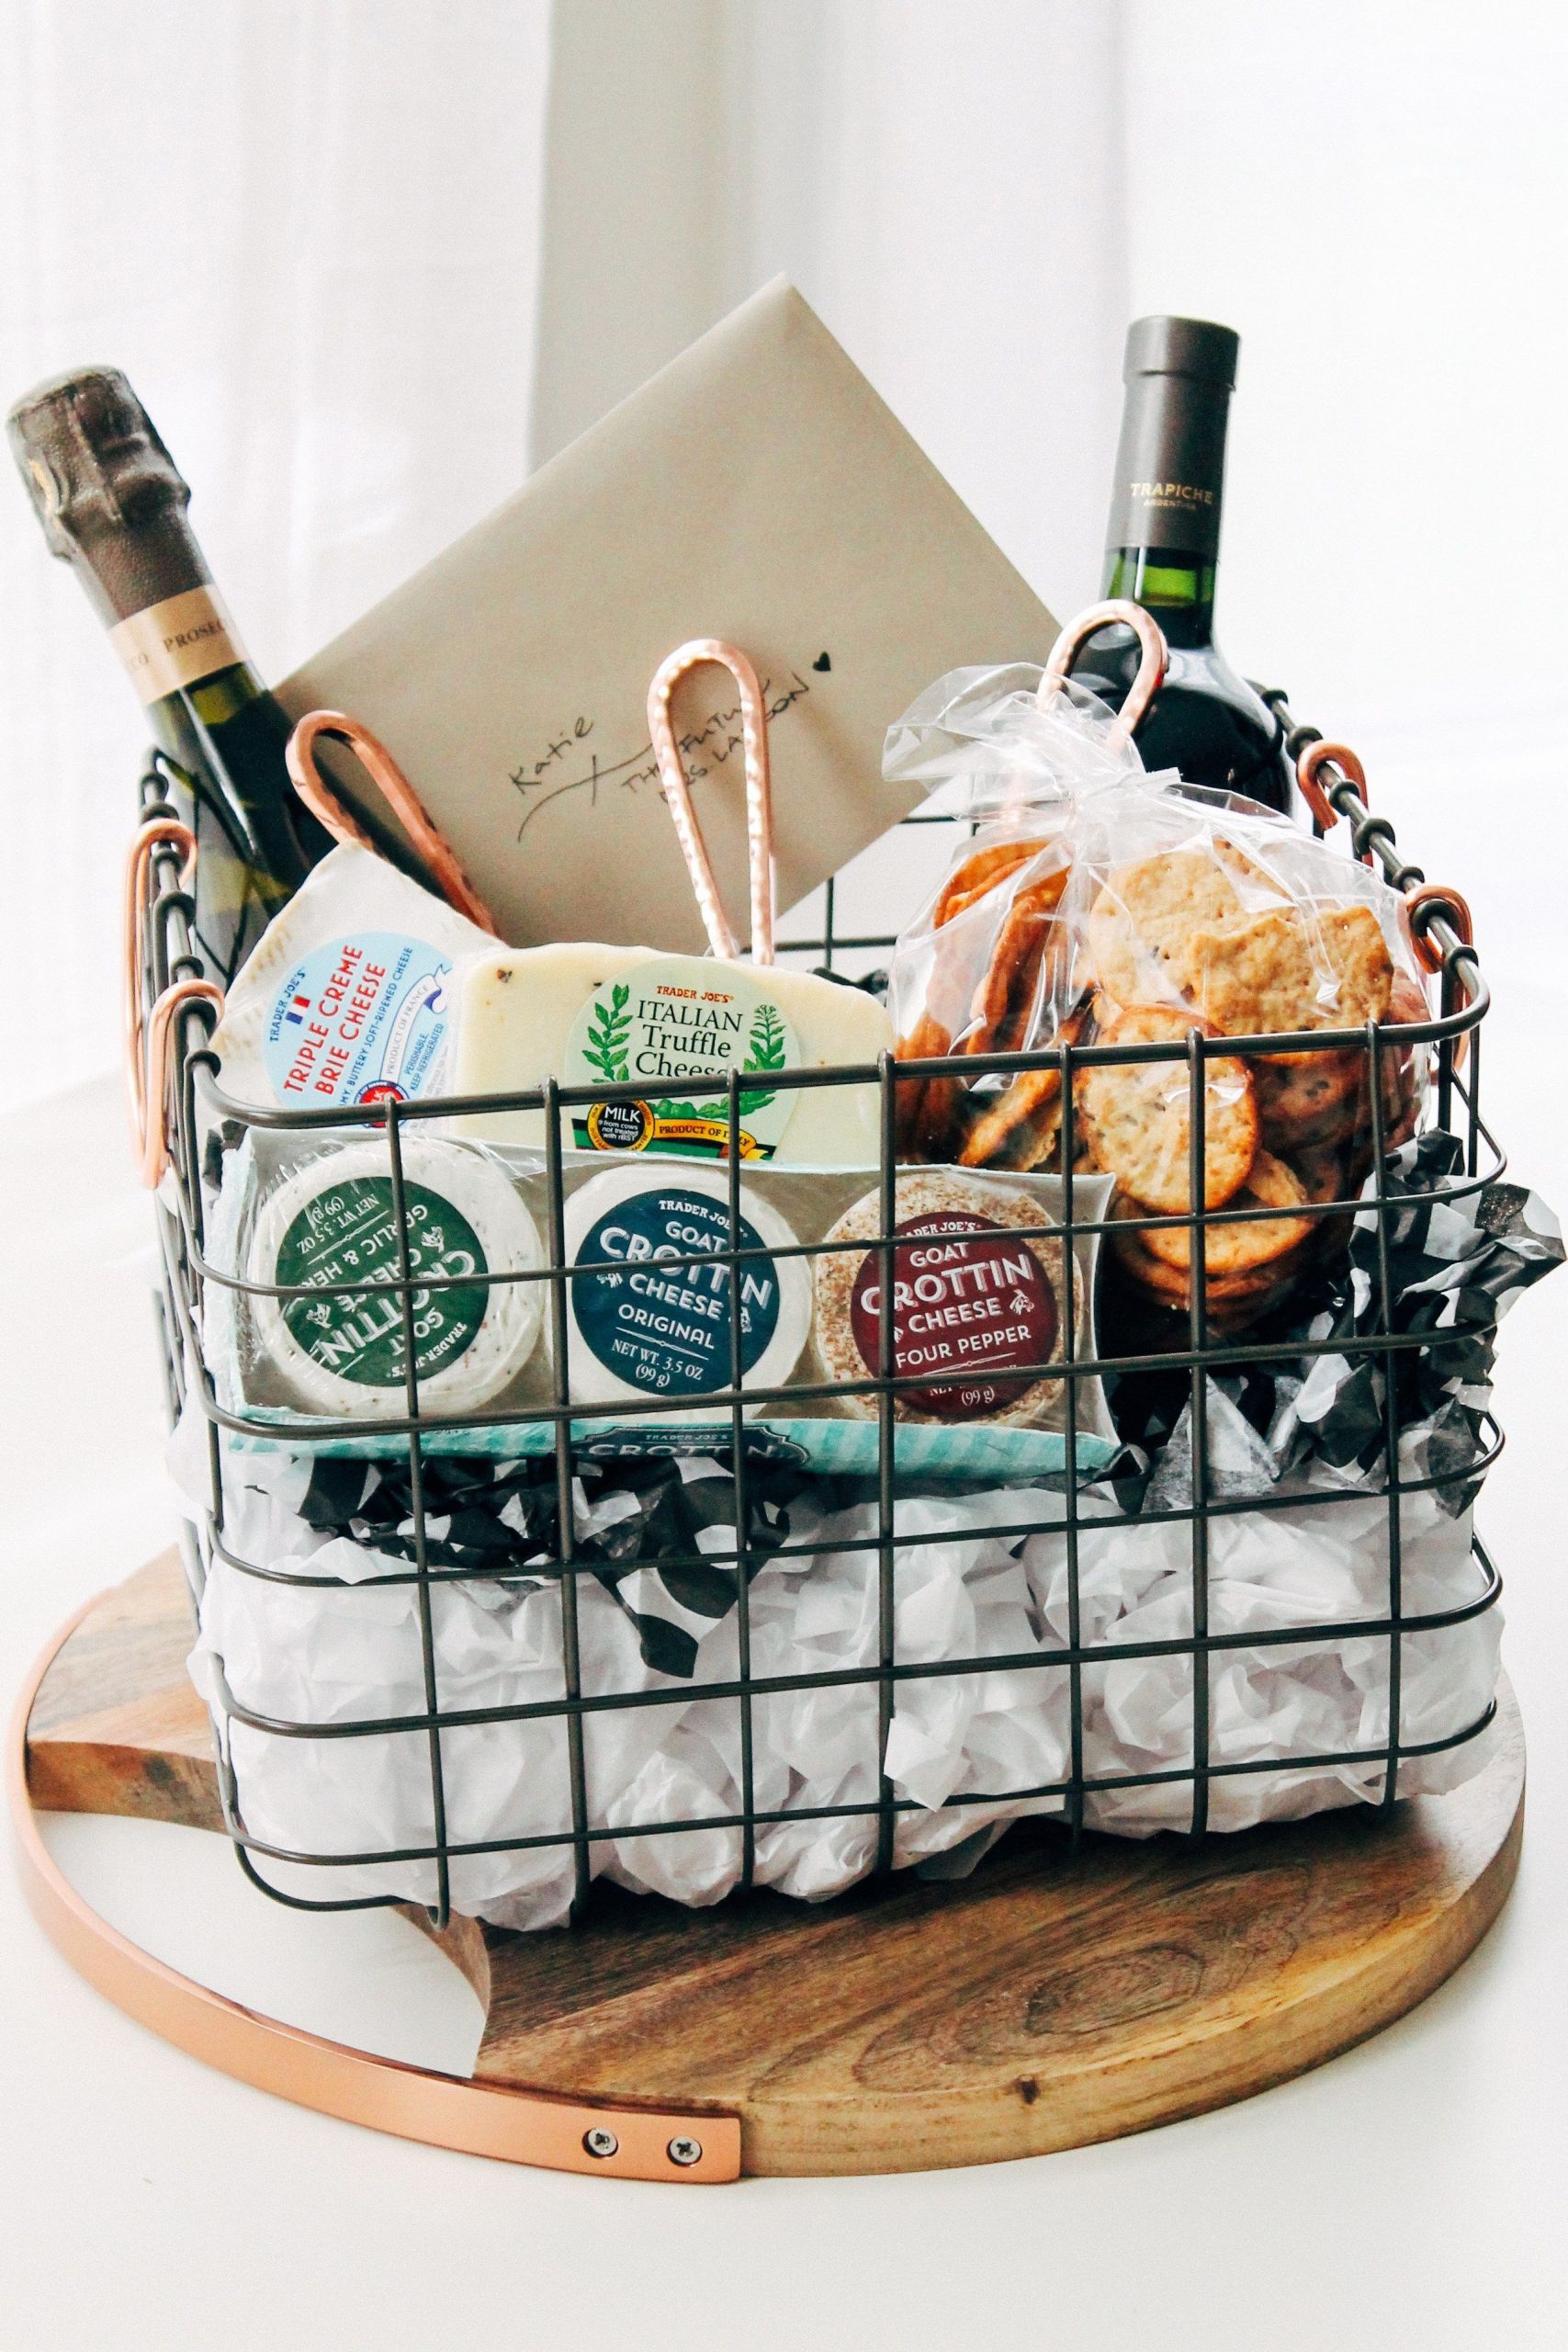 Homemade Wine Gift Basket Ideas
 the ultimate cheese t basket playswellwithbutter